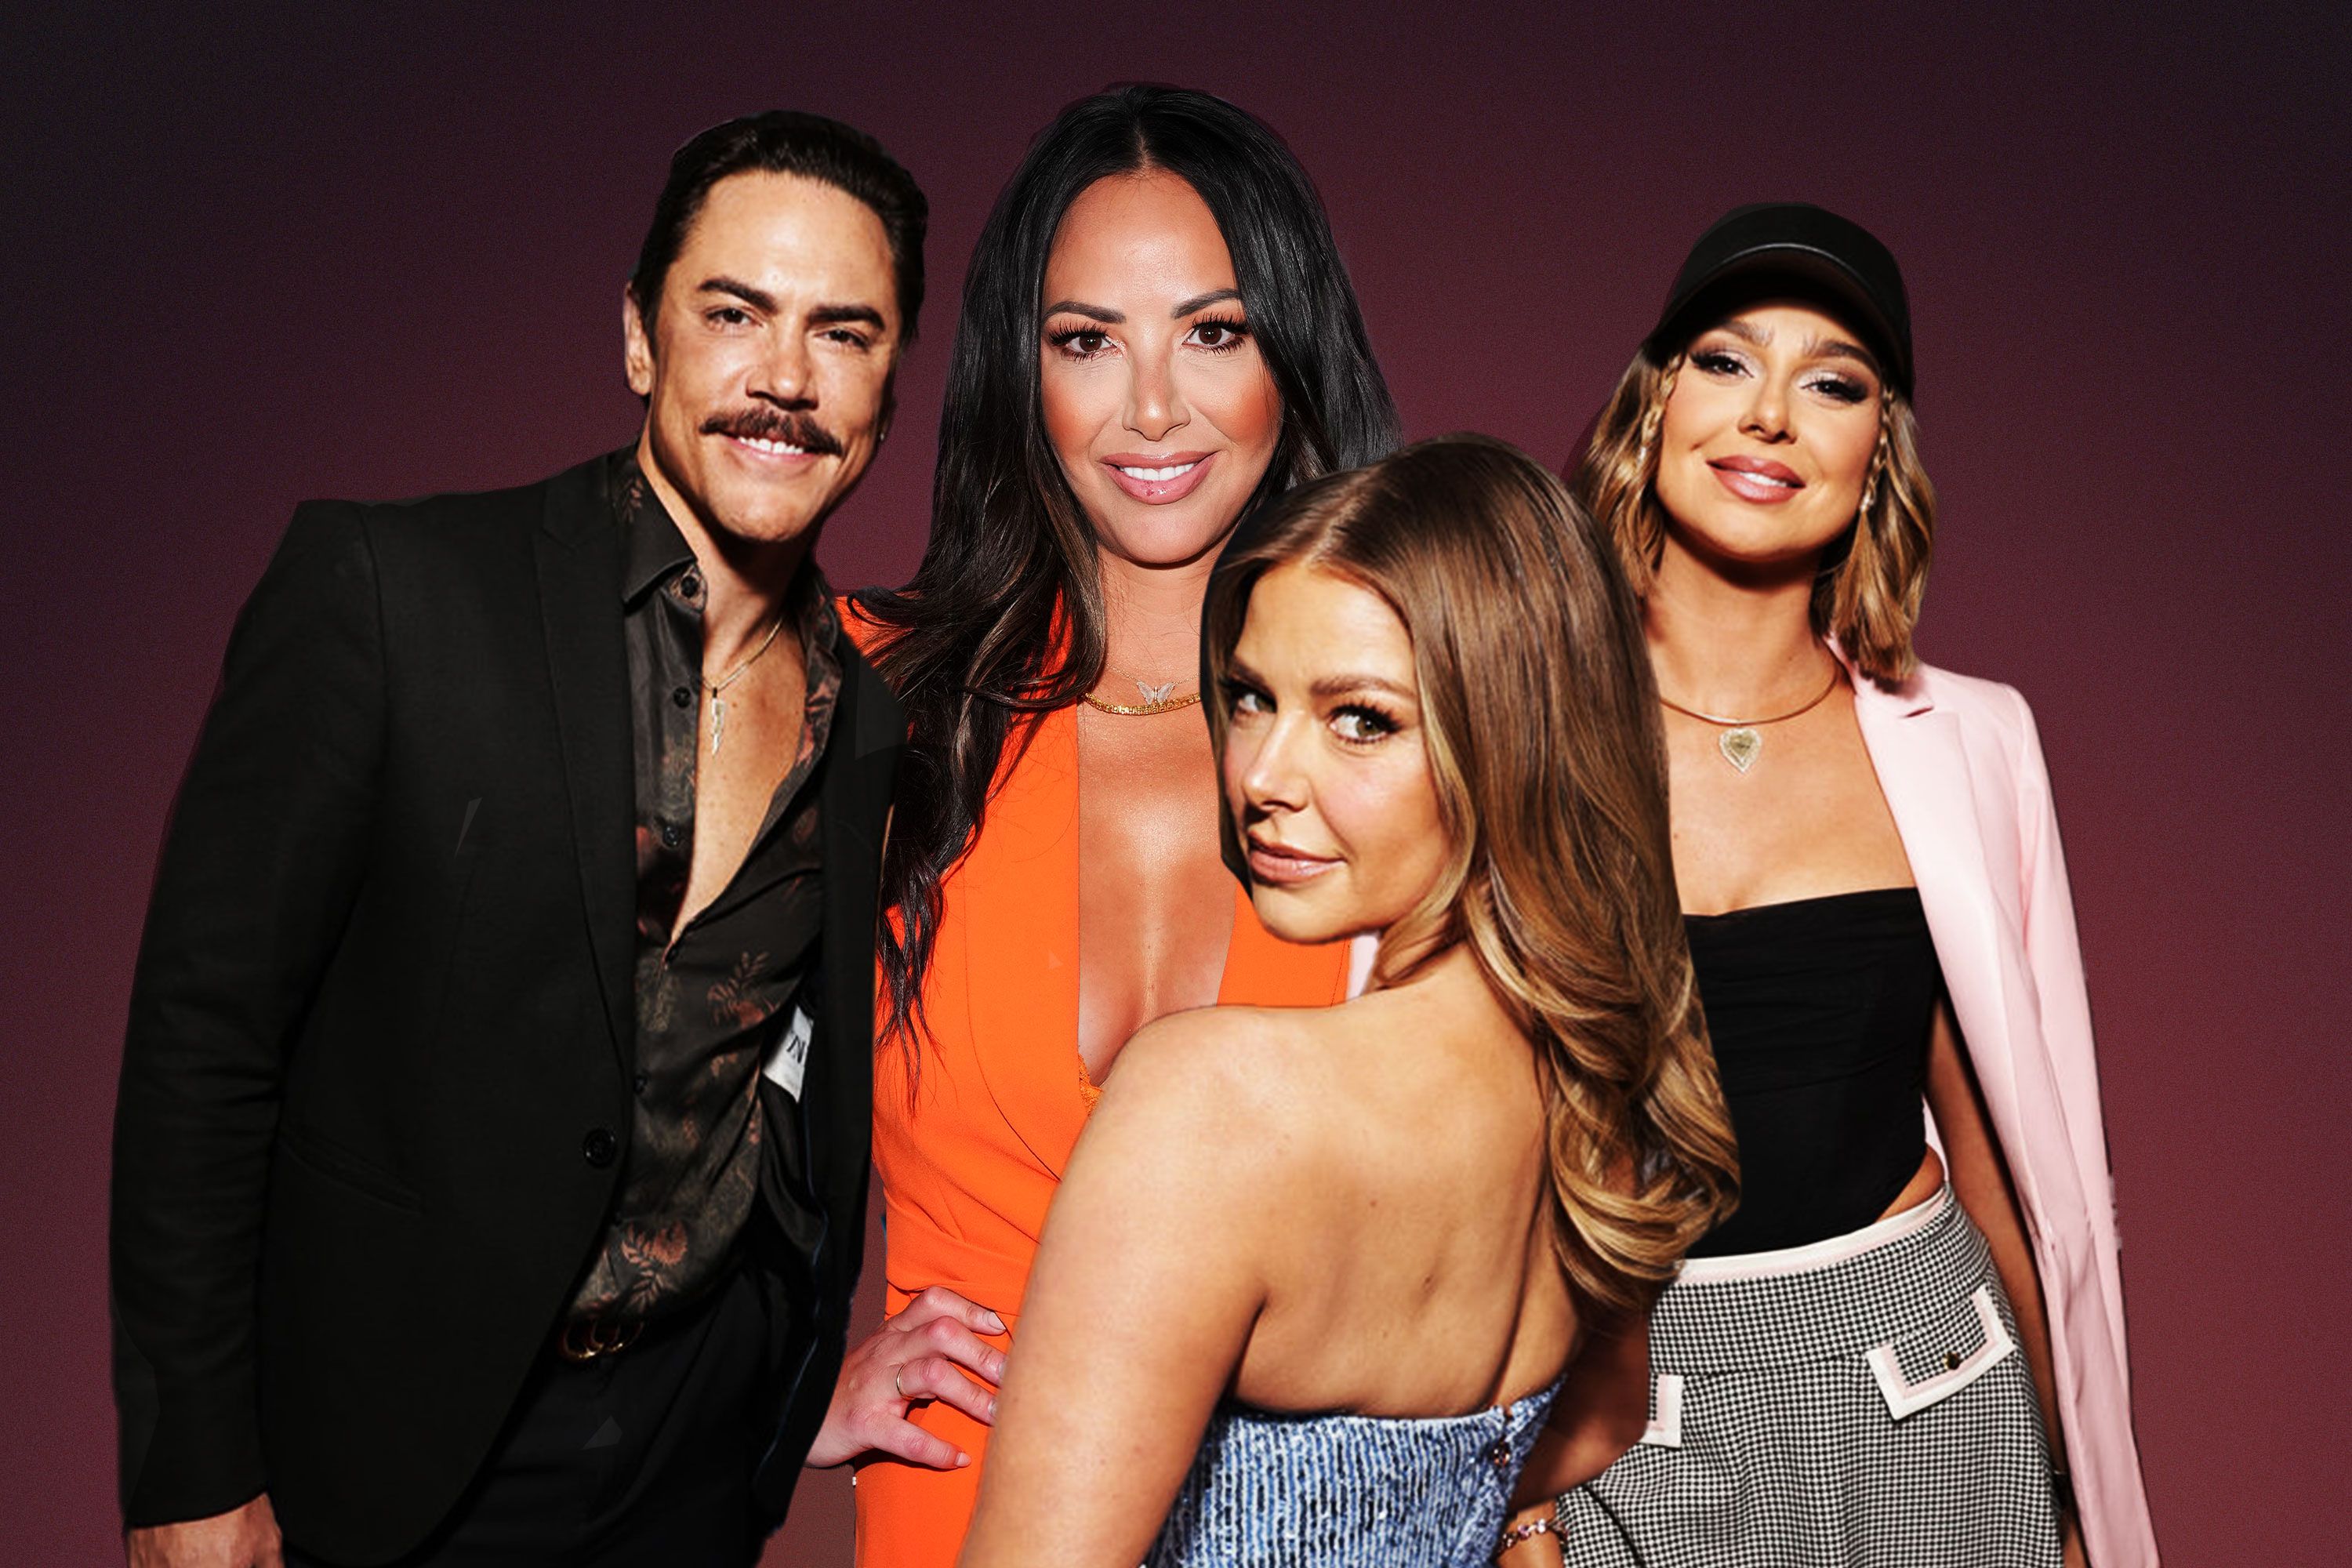 10 Vanderpump Rules Episodes to Watch Before the Reunion pic